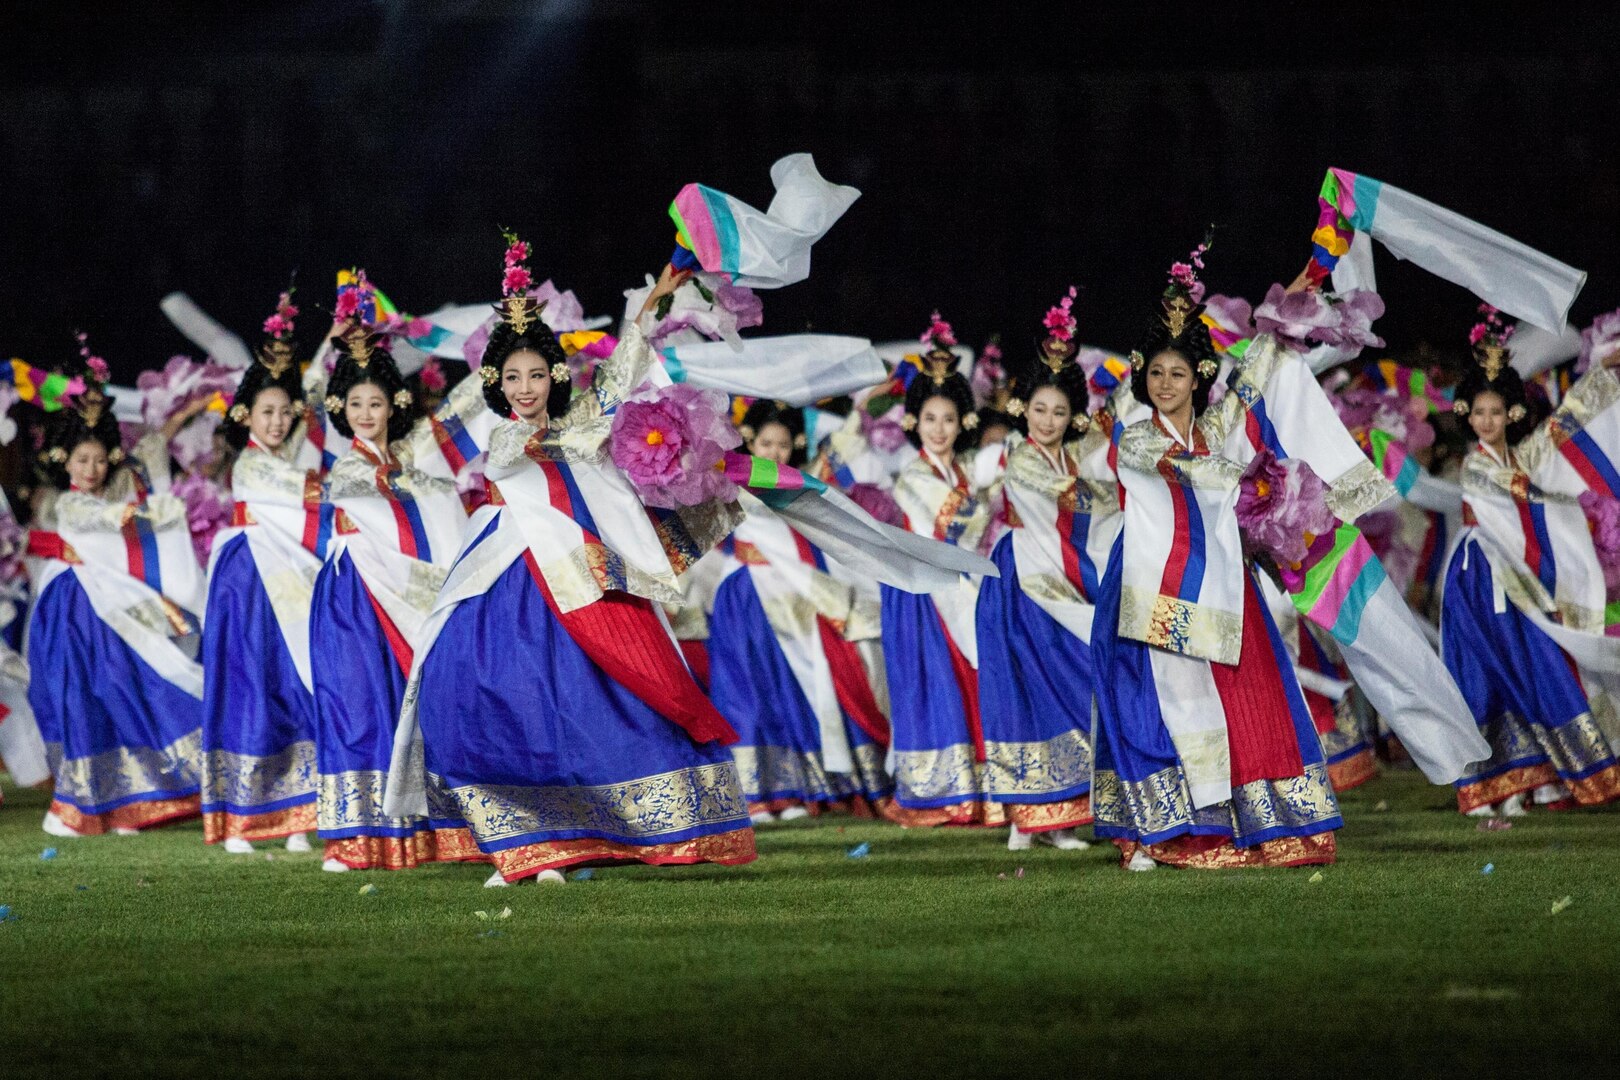 Athletes of over 100 nations joined together in Mungyeong, South Korea, for the Opening Ceremony of the 2015 6th Conseil International du Sport Militaire (CISM) World Games. The ceremony included the marching in of each nation, words from the president of South Korea and many Korean cultural dances. The CISM World Games provides the opportunity for the athletes of these nations to come together and enjoy friendship through sports. The sixth annual CISM World Games are being held aboard Mungyeong, South Korea, Sept. 30-Oct. 11.